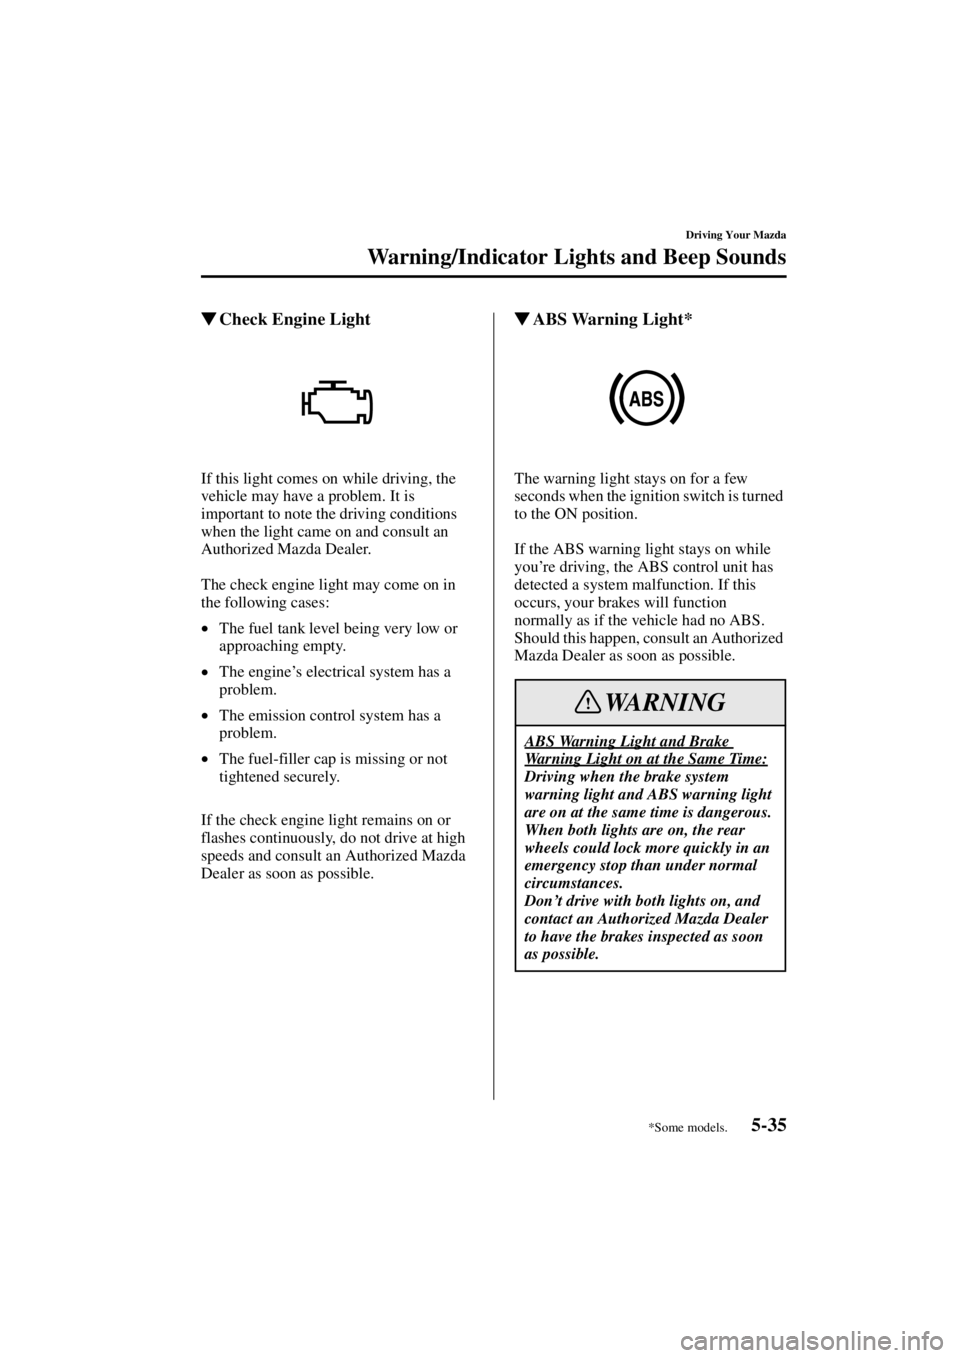 MAZDA MODEL 3 5-DOOR 2004  Owners Manual 5-35
Driving Your Mazda
Warning/Indicator Lights and Beep Sounds
Form No. 8S18-EA-03I
Check Engine Light
If this light comes on while driving, the 
vehicle may have a problem. It is 
important to not